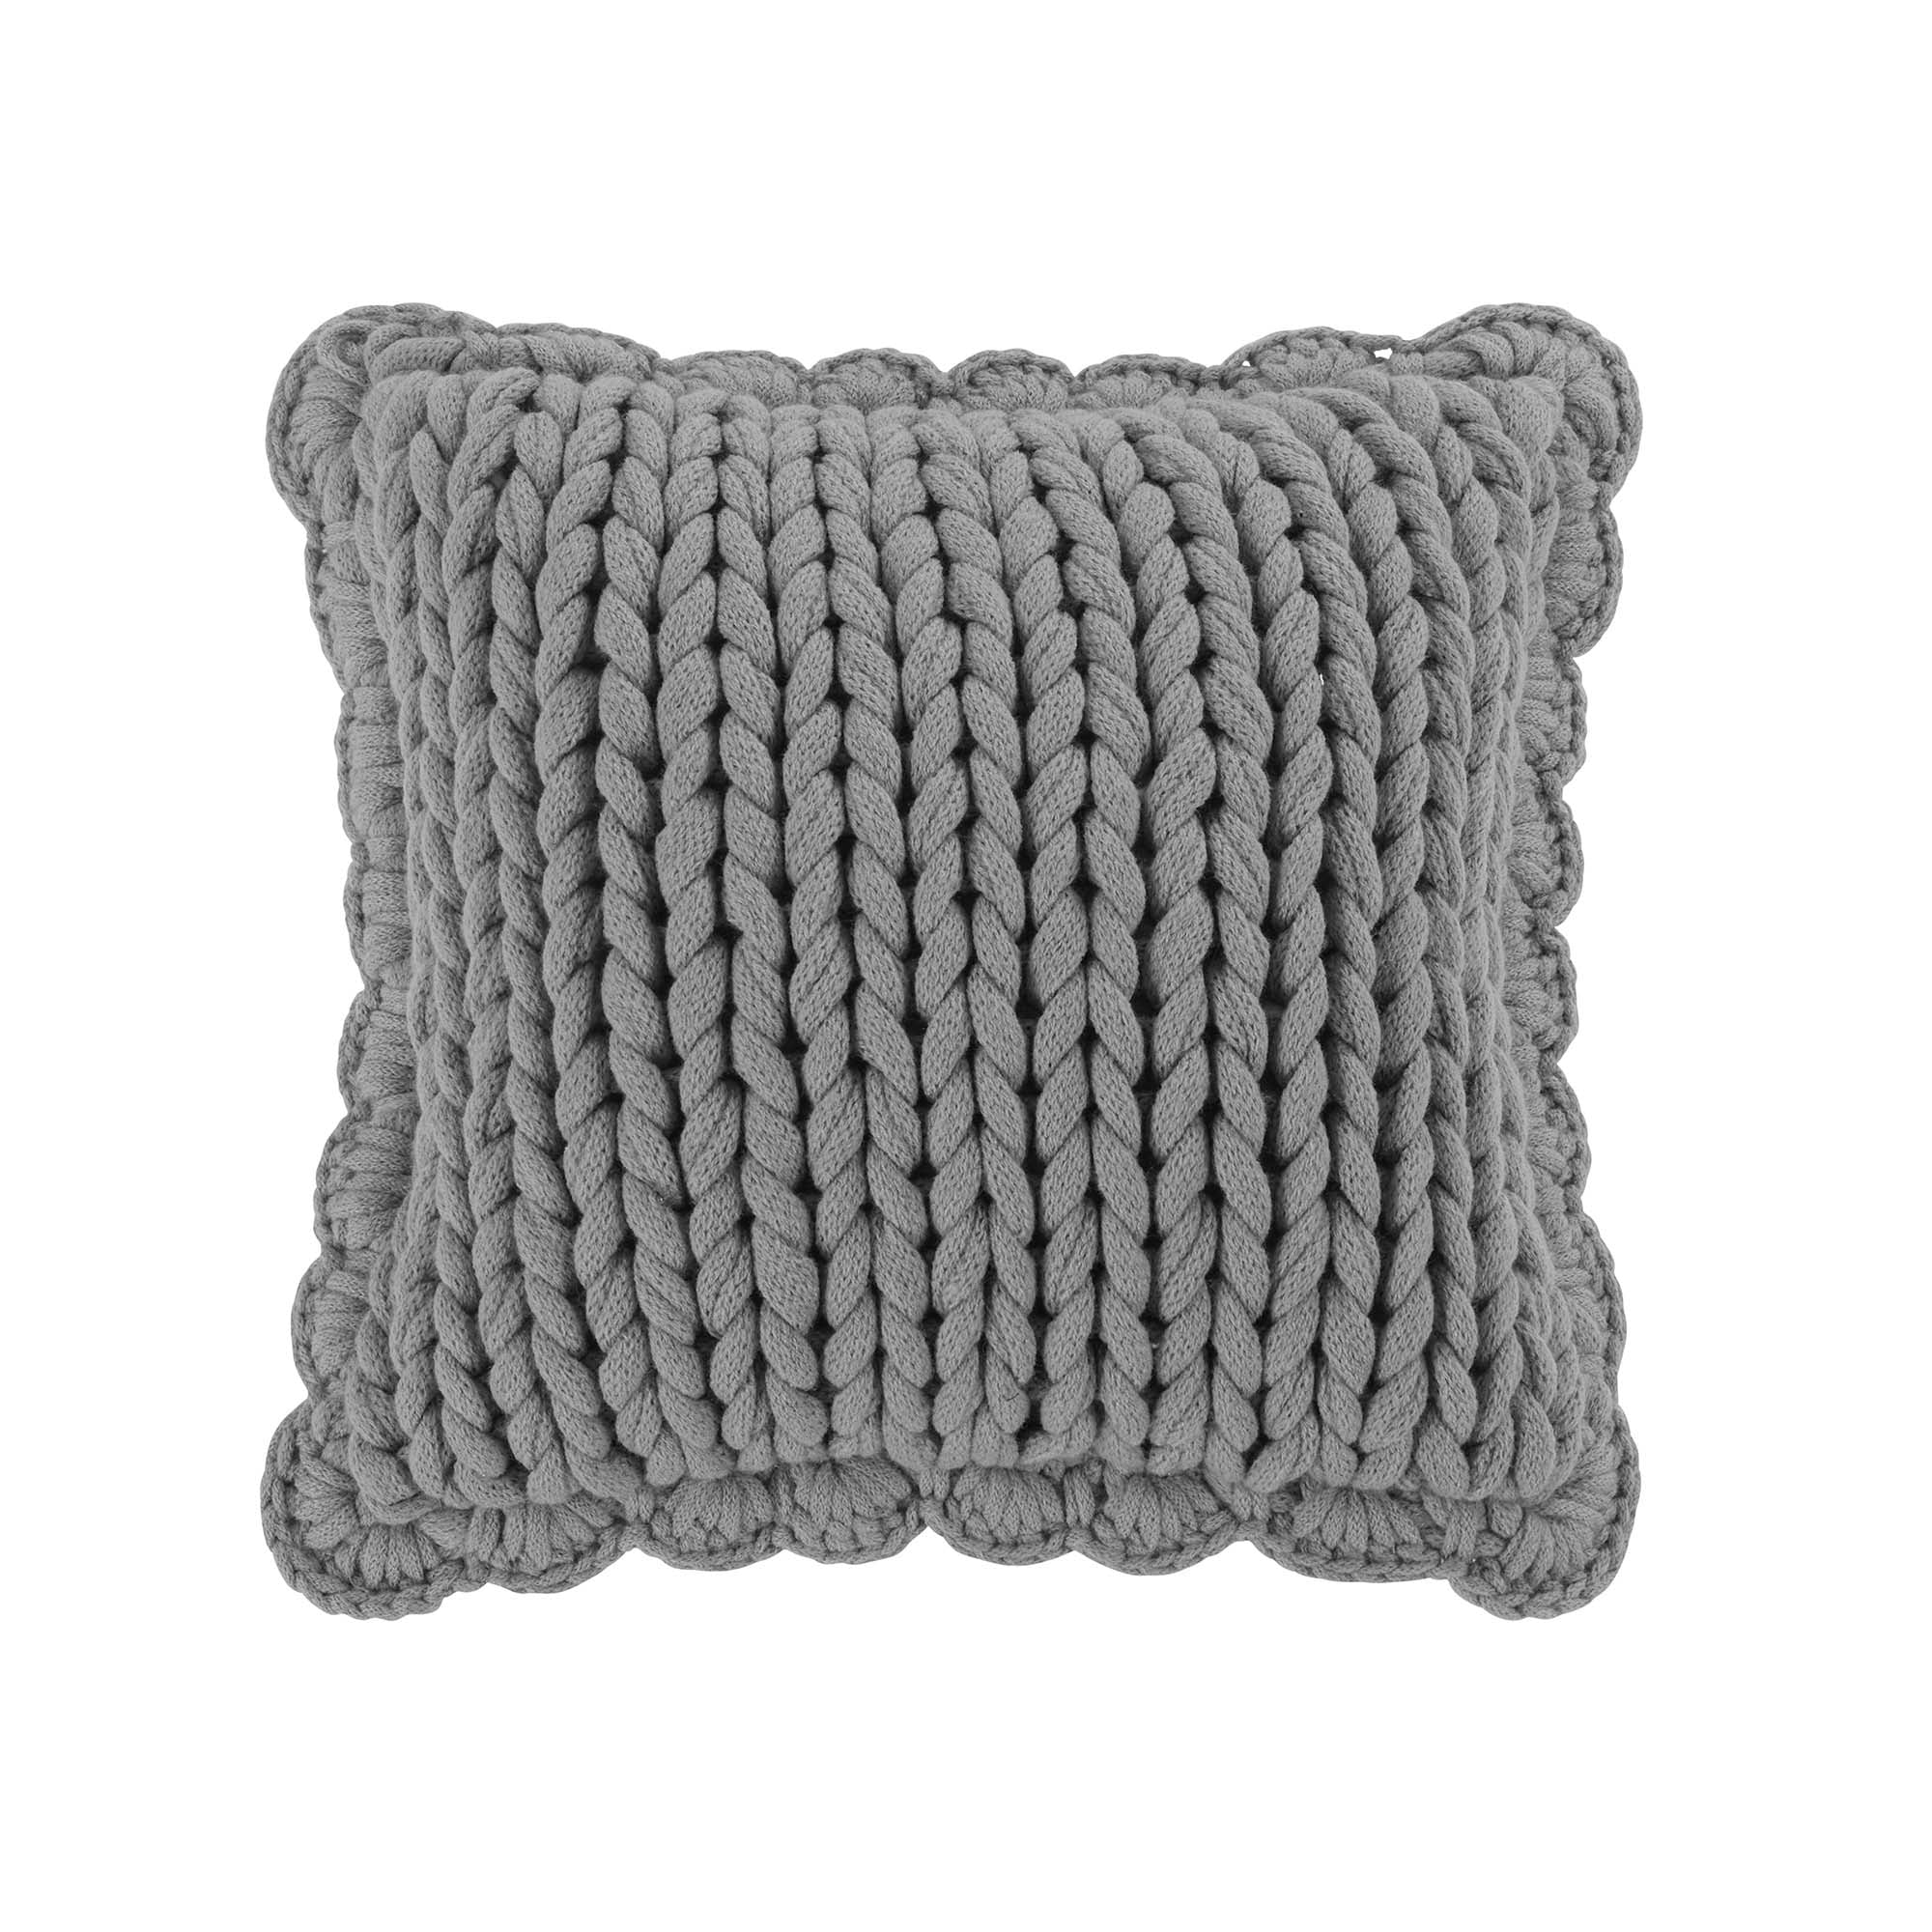 Chunky Knitted Grey Decorative Pillow Throw Pillows By Donna Sharp